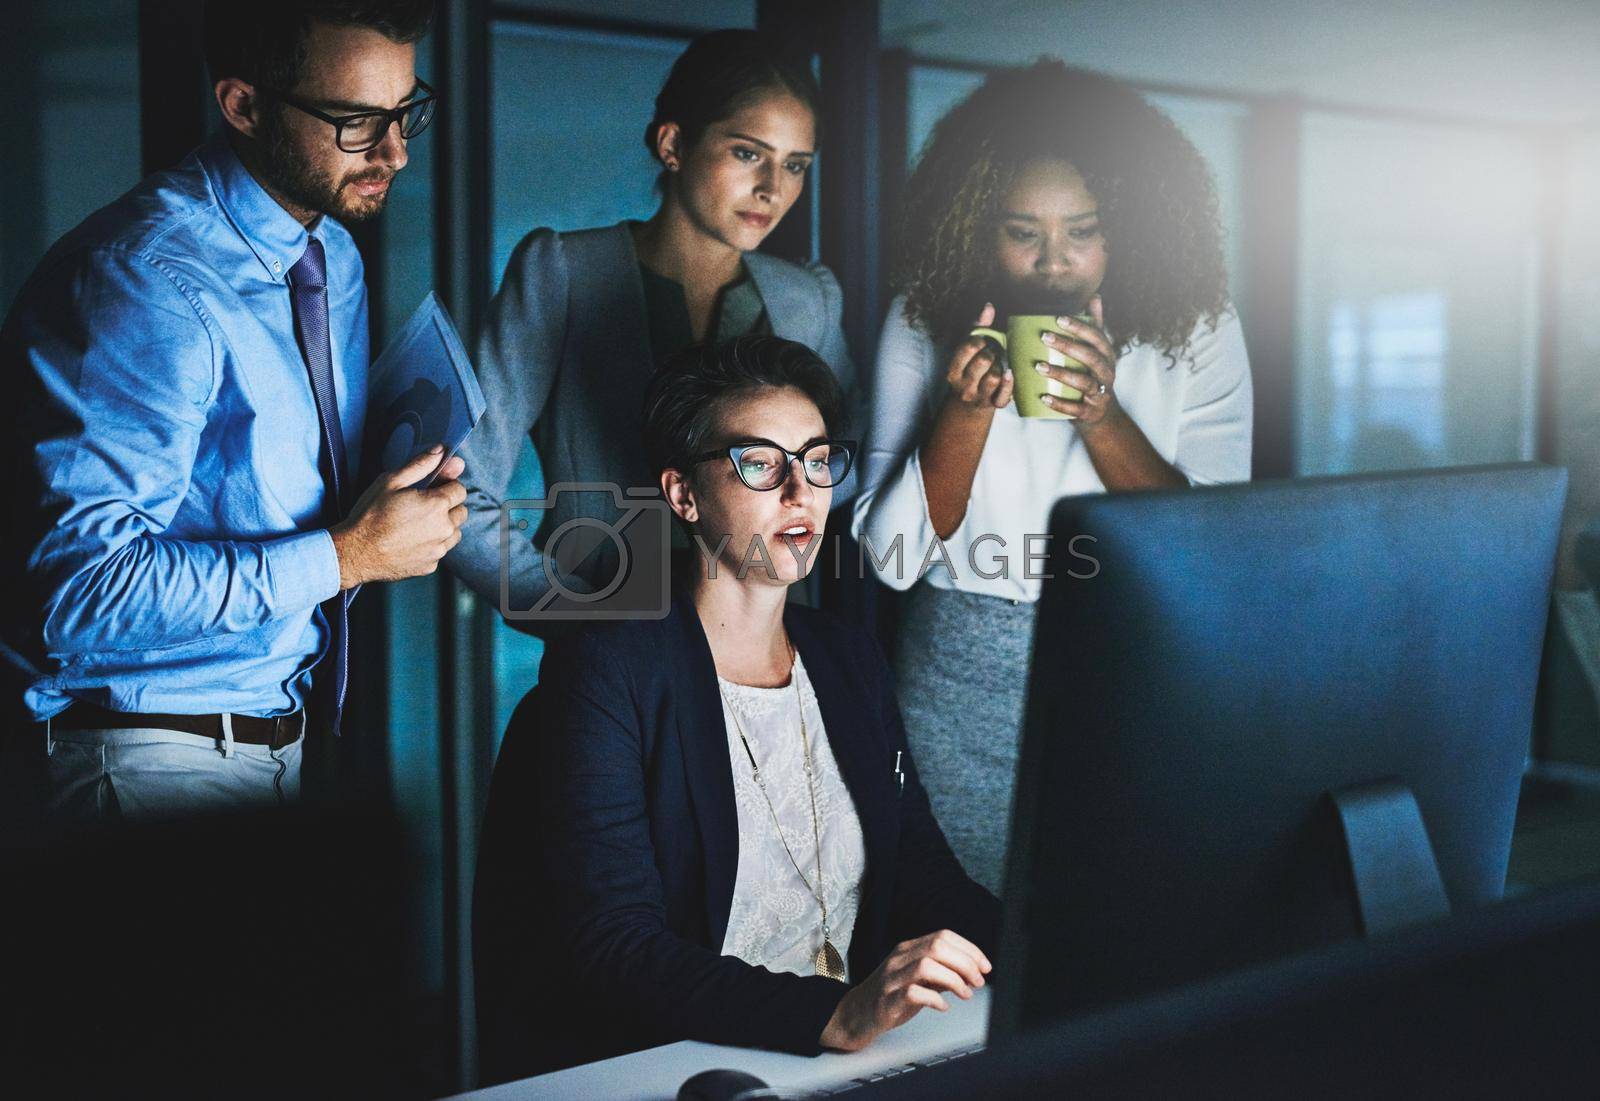 Royalty free image of We think of a deadline as motivation not an obstacle. colleagues standing together as they work on something on a computer at night. by YuriArcurs